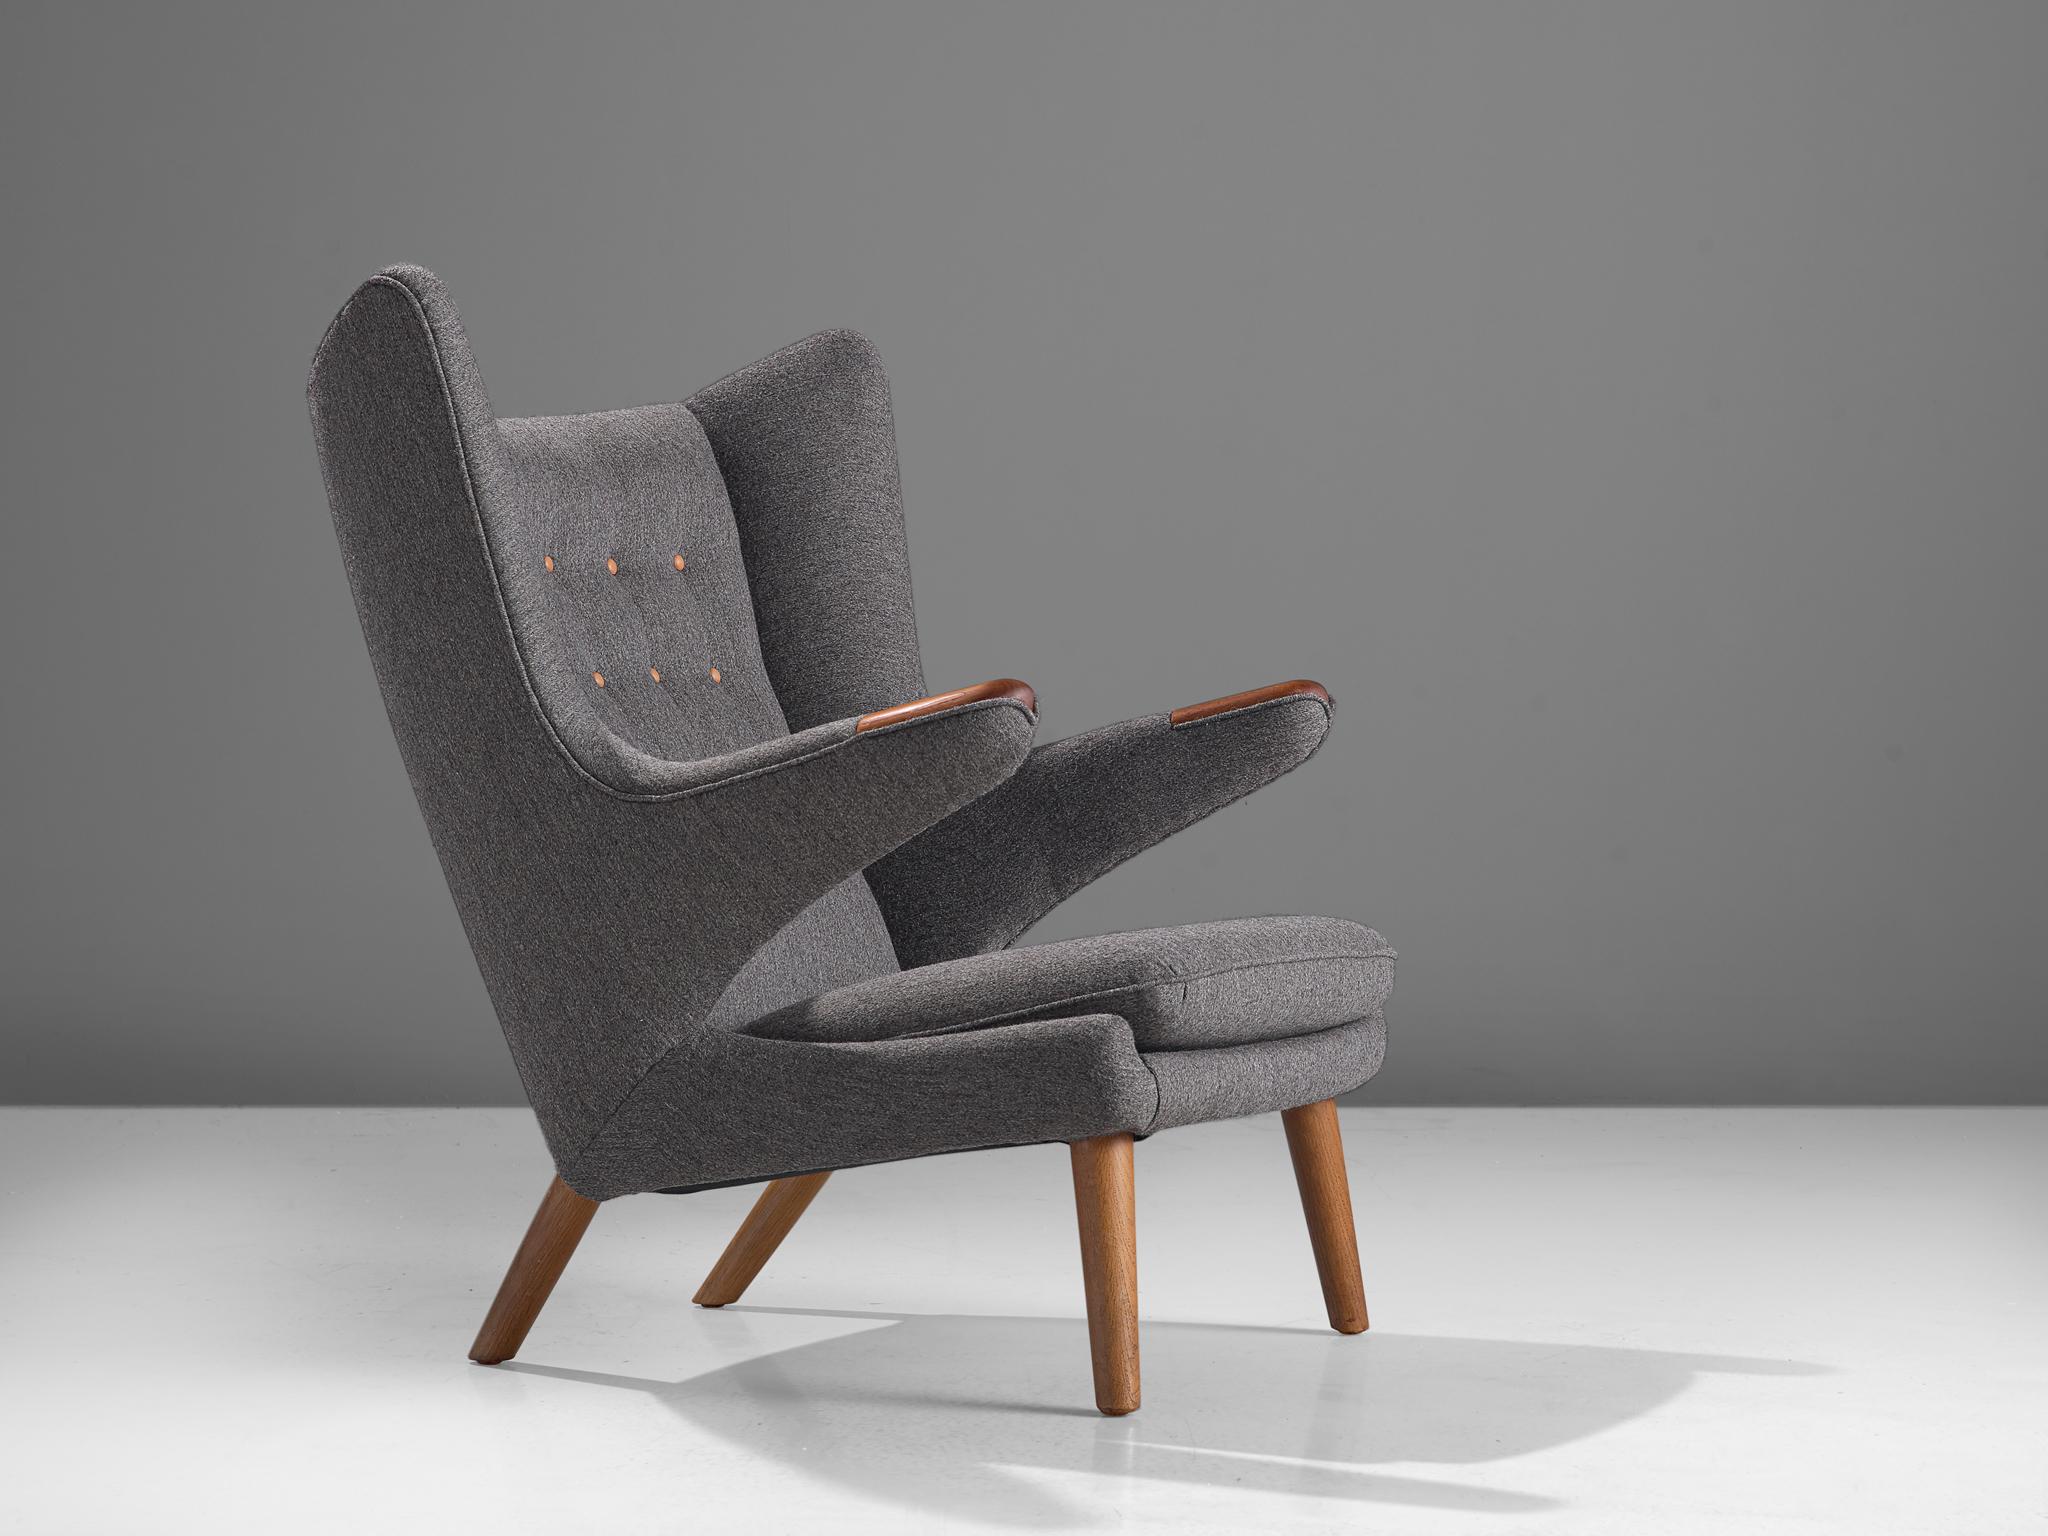 Hans J. Wegner, lounge chair Model AP 19 'Papa Bear, fabric and oak, Denmark, 1951 design, production later, 

This semi-wingback armchair, has an open expression in contrast with its historical ancestors. Wegner made a few considerations about